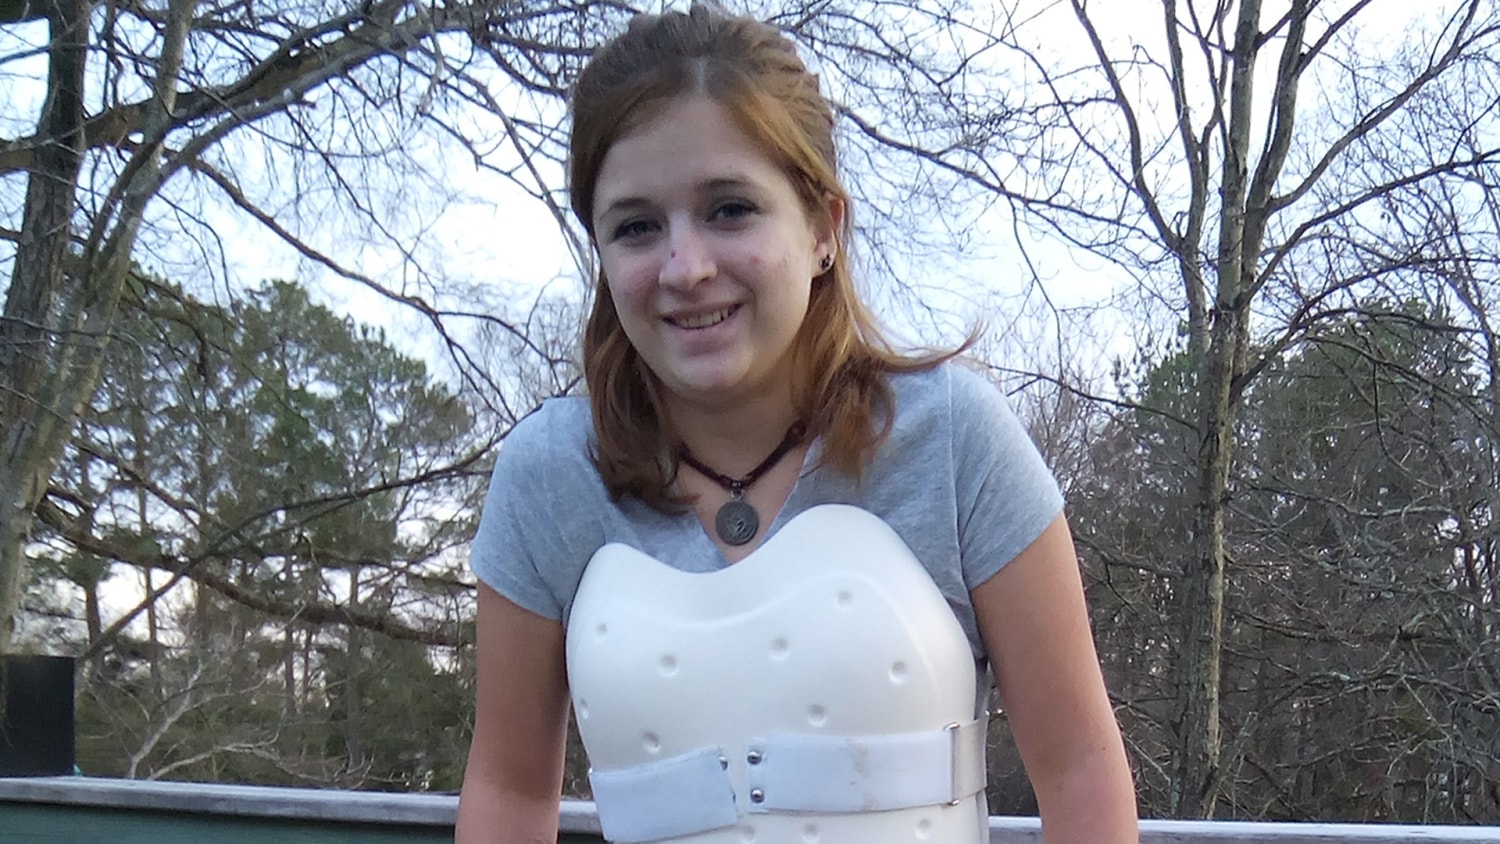 Back brace transformed into armor gives teen girl confidence